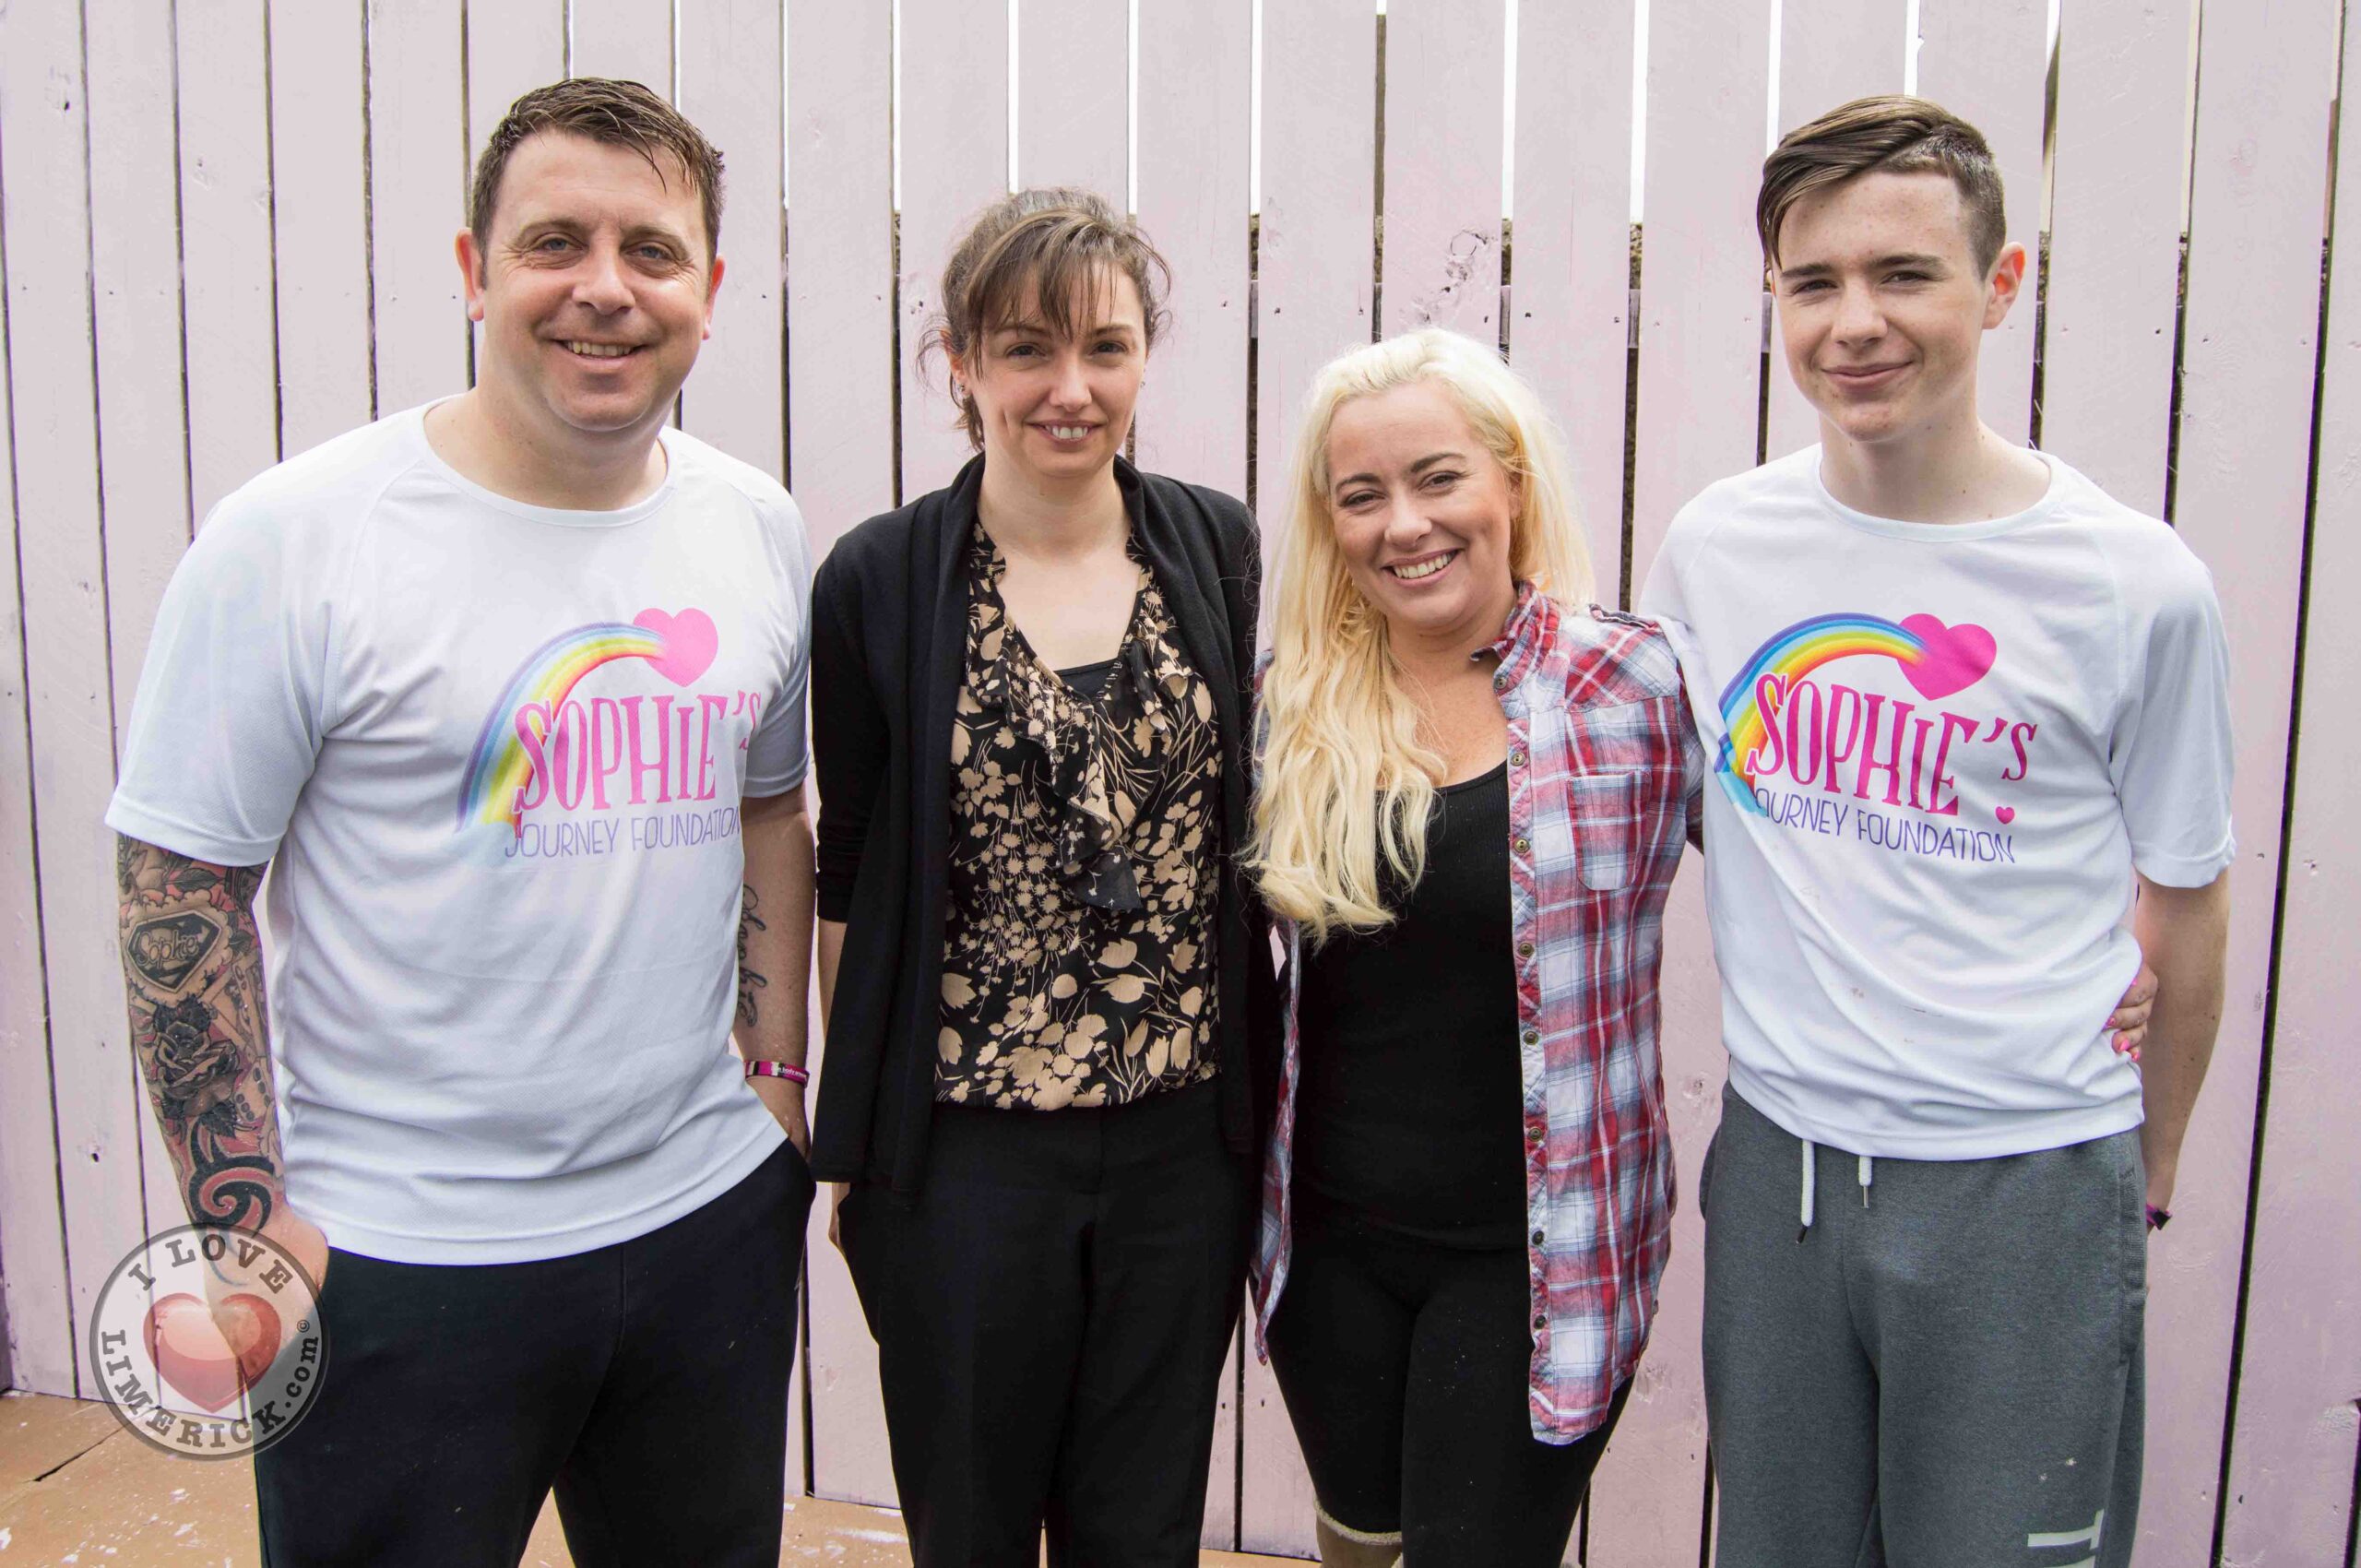 Pictured creating a mural at San Joseph Children's Respite Centre - Liam Mulcahy, Sophie's Foundation, nurse Majella Short, Stacey Mulchahy and Dion O' Dowd. Picture: Billy Butler/ilovelimerick